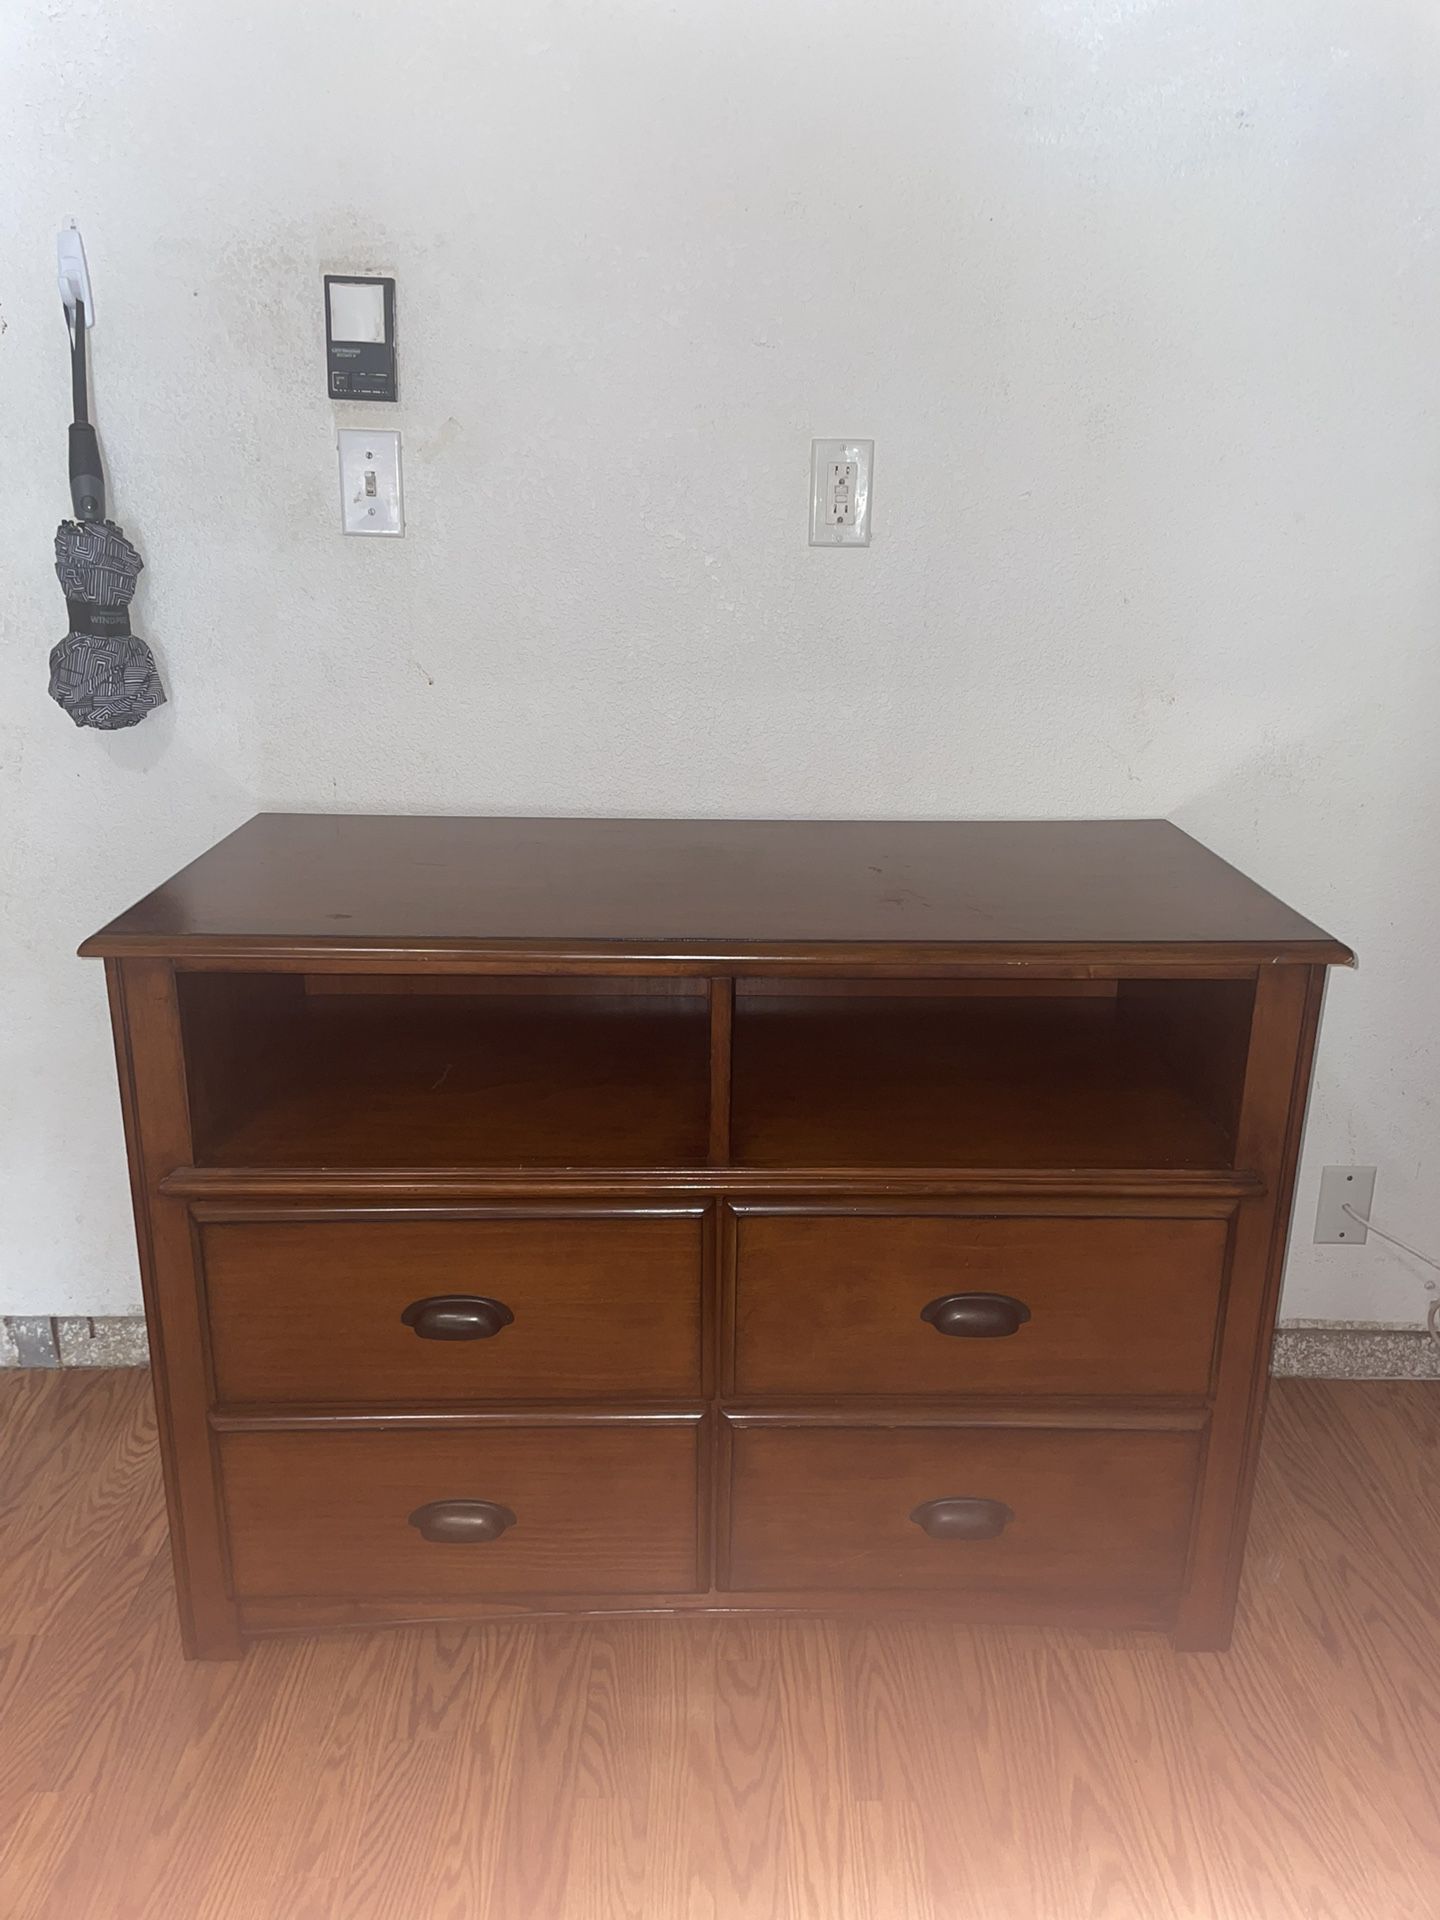 Tv stand with drawers